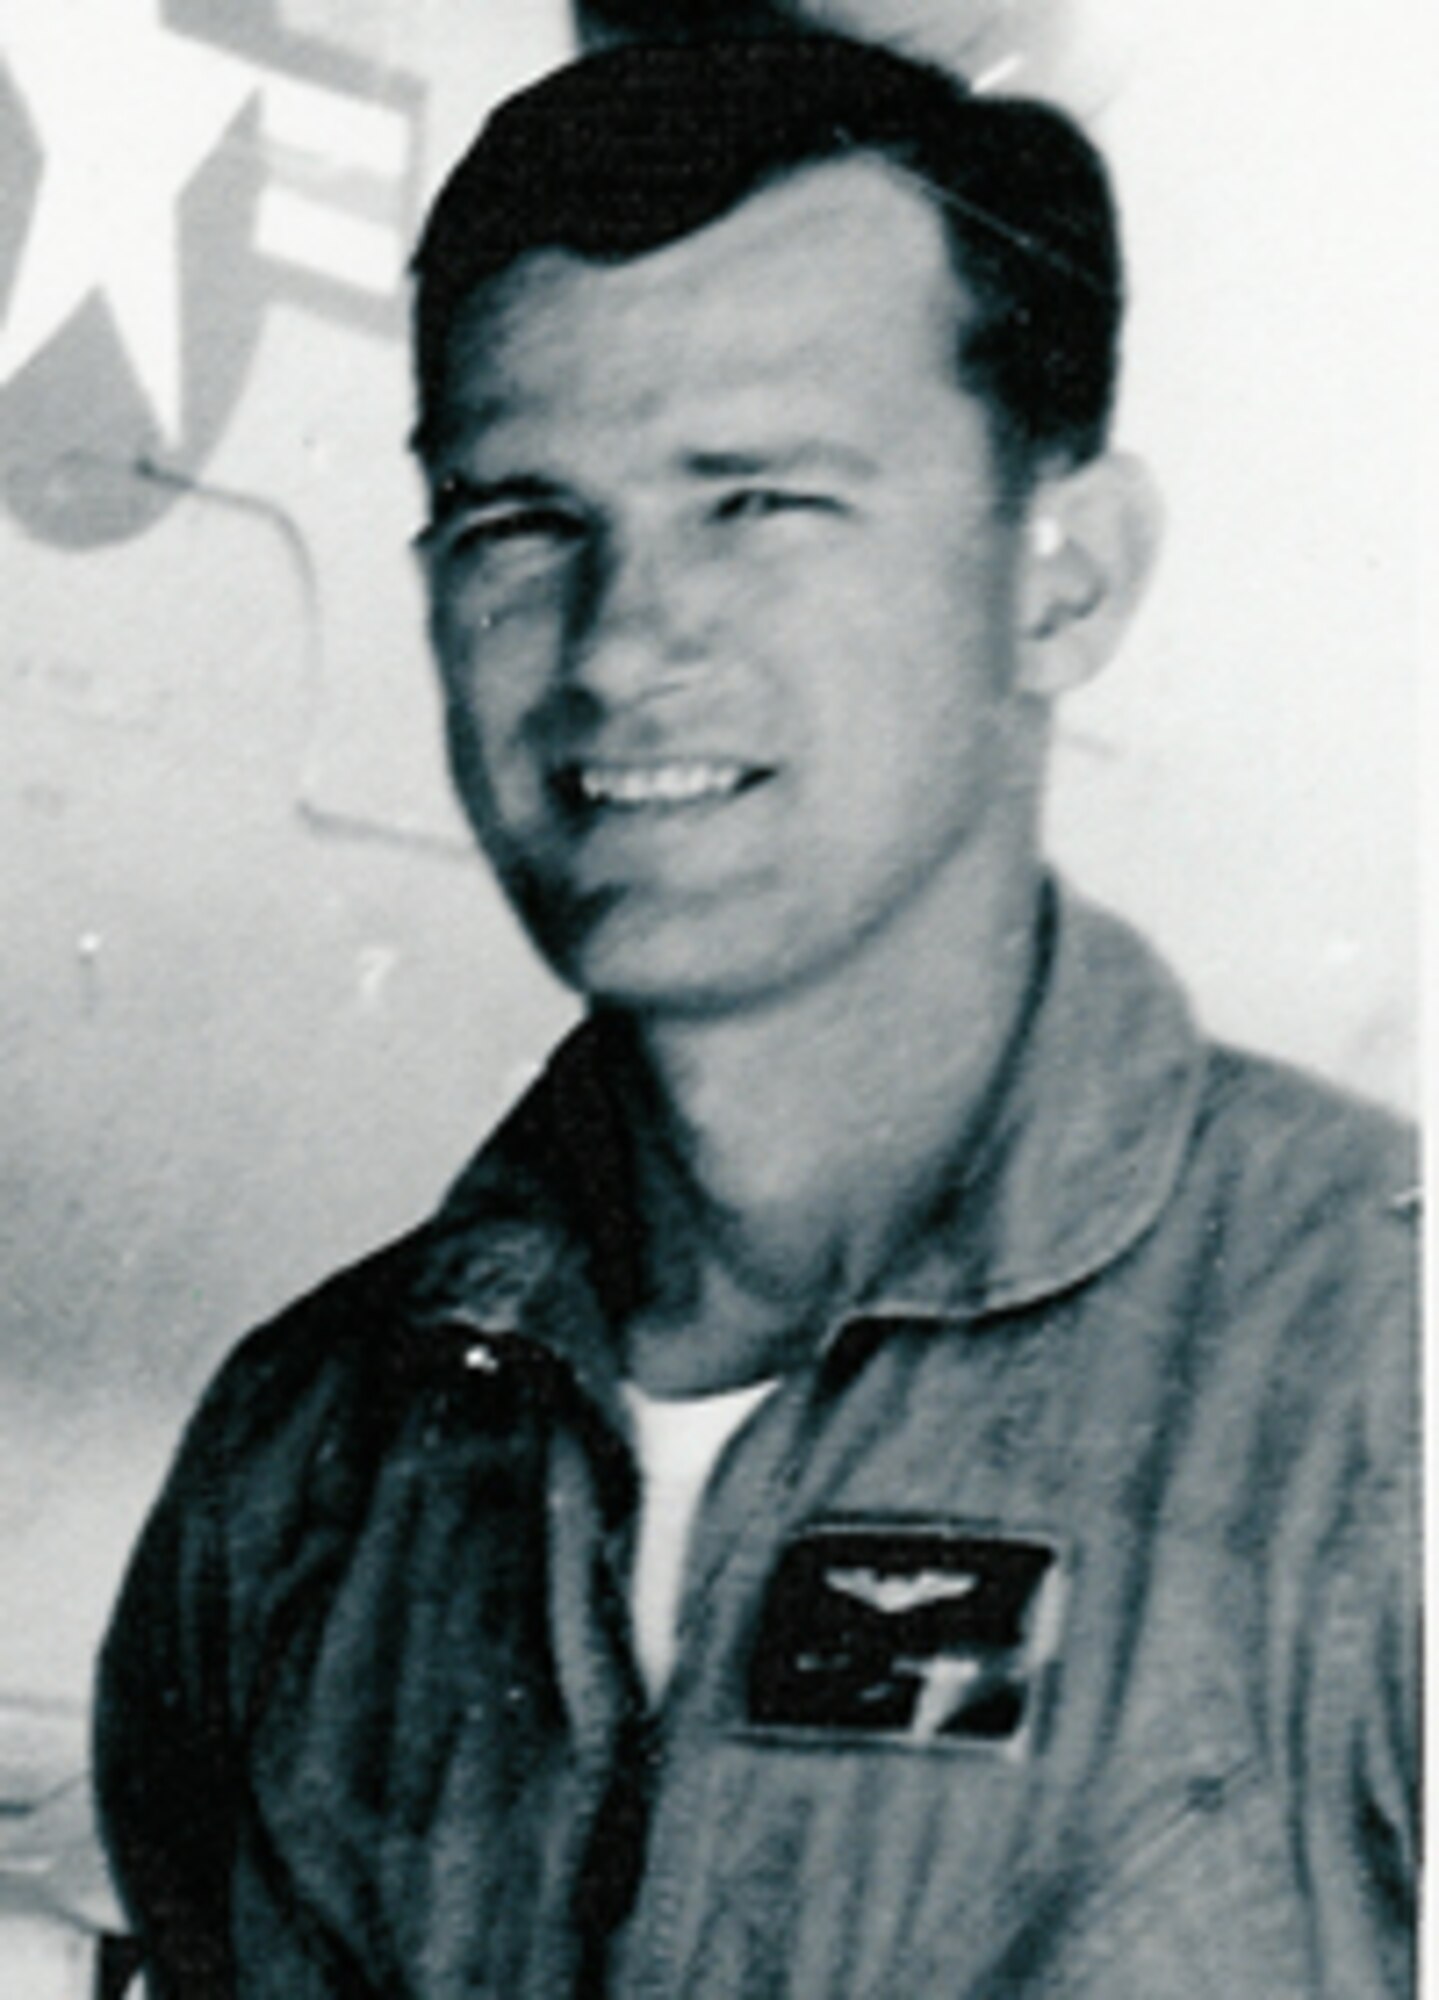 Col. Ralph Balcom left to serve as a fighter pilot in the Vietnam War in November of 1965. On May 15, 1966, Balcom was declared missing in action, and is presumed deceased. His family has been waiting for almost 48 years for his return. (Courtesy photo)